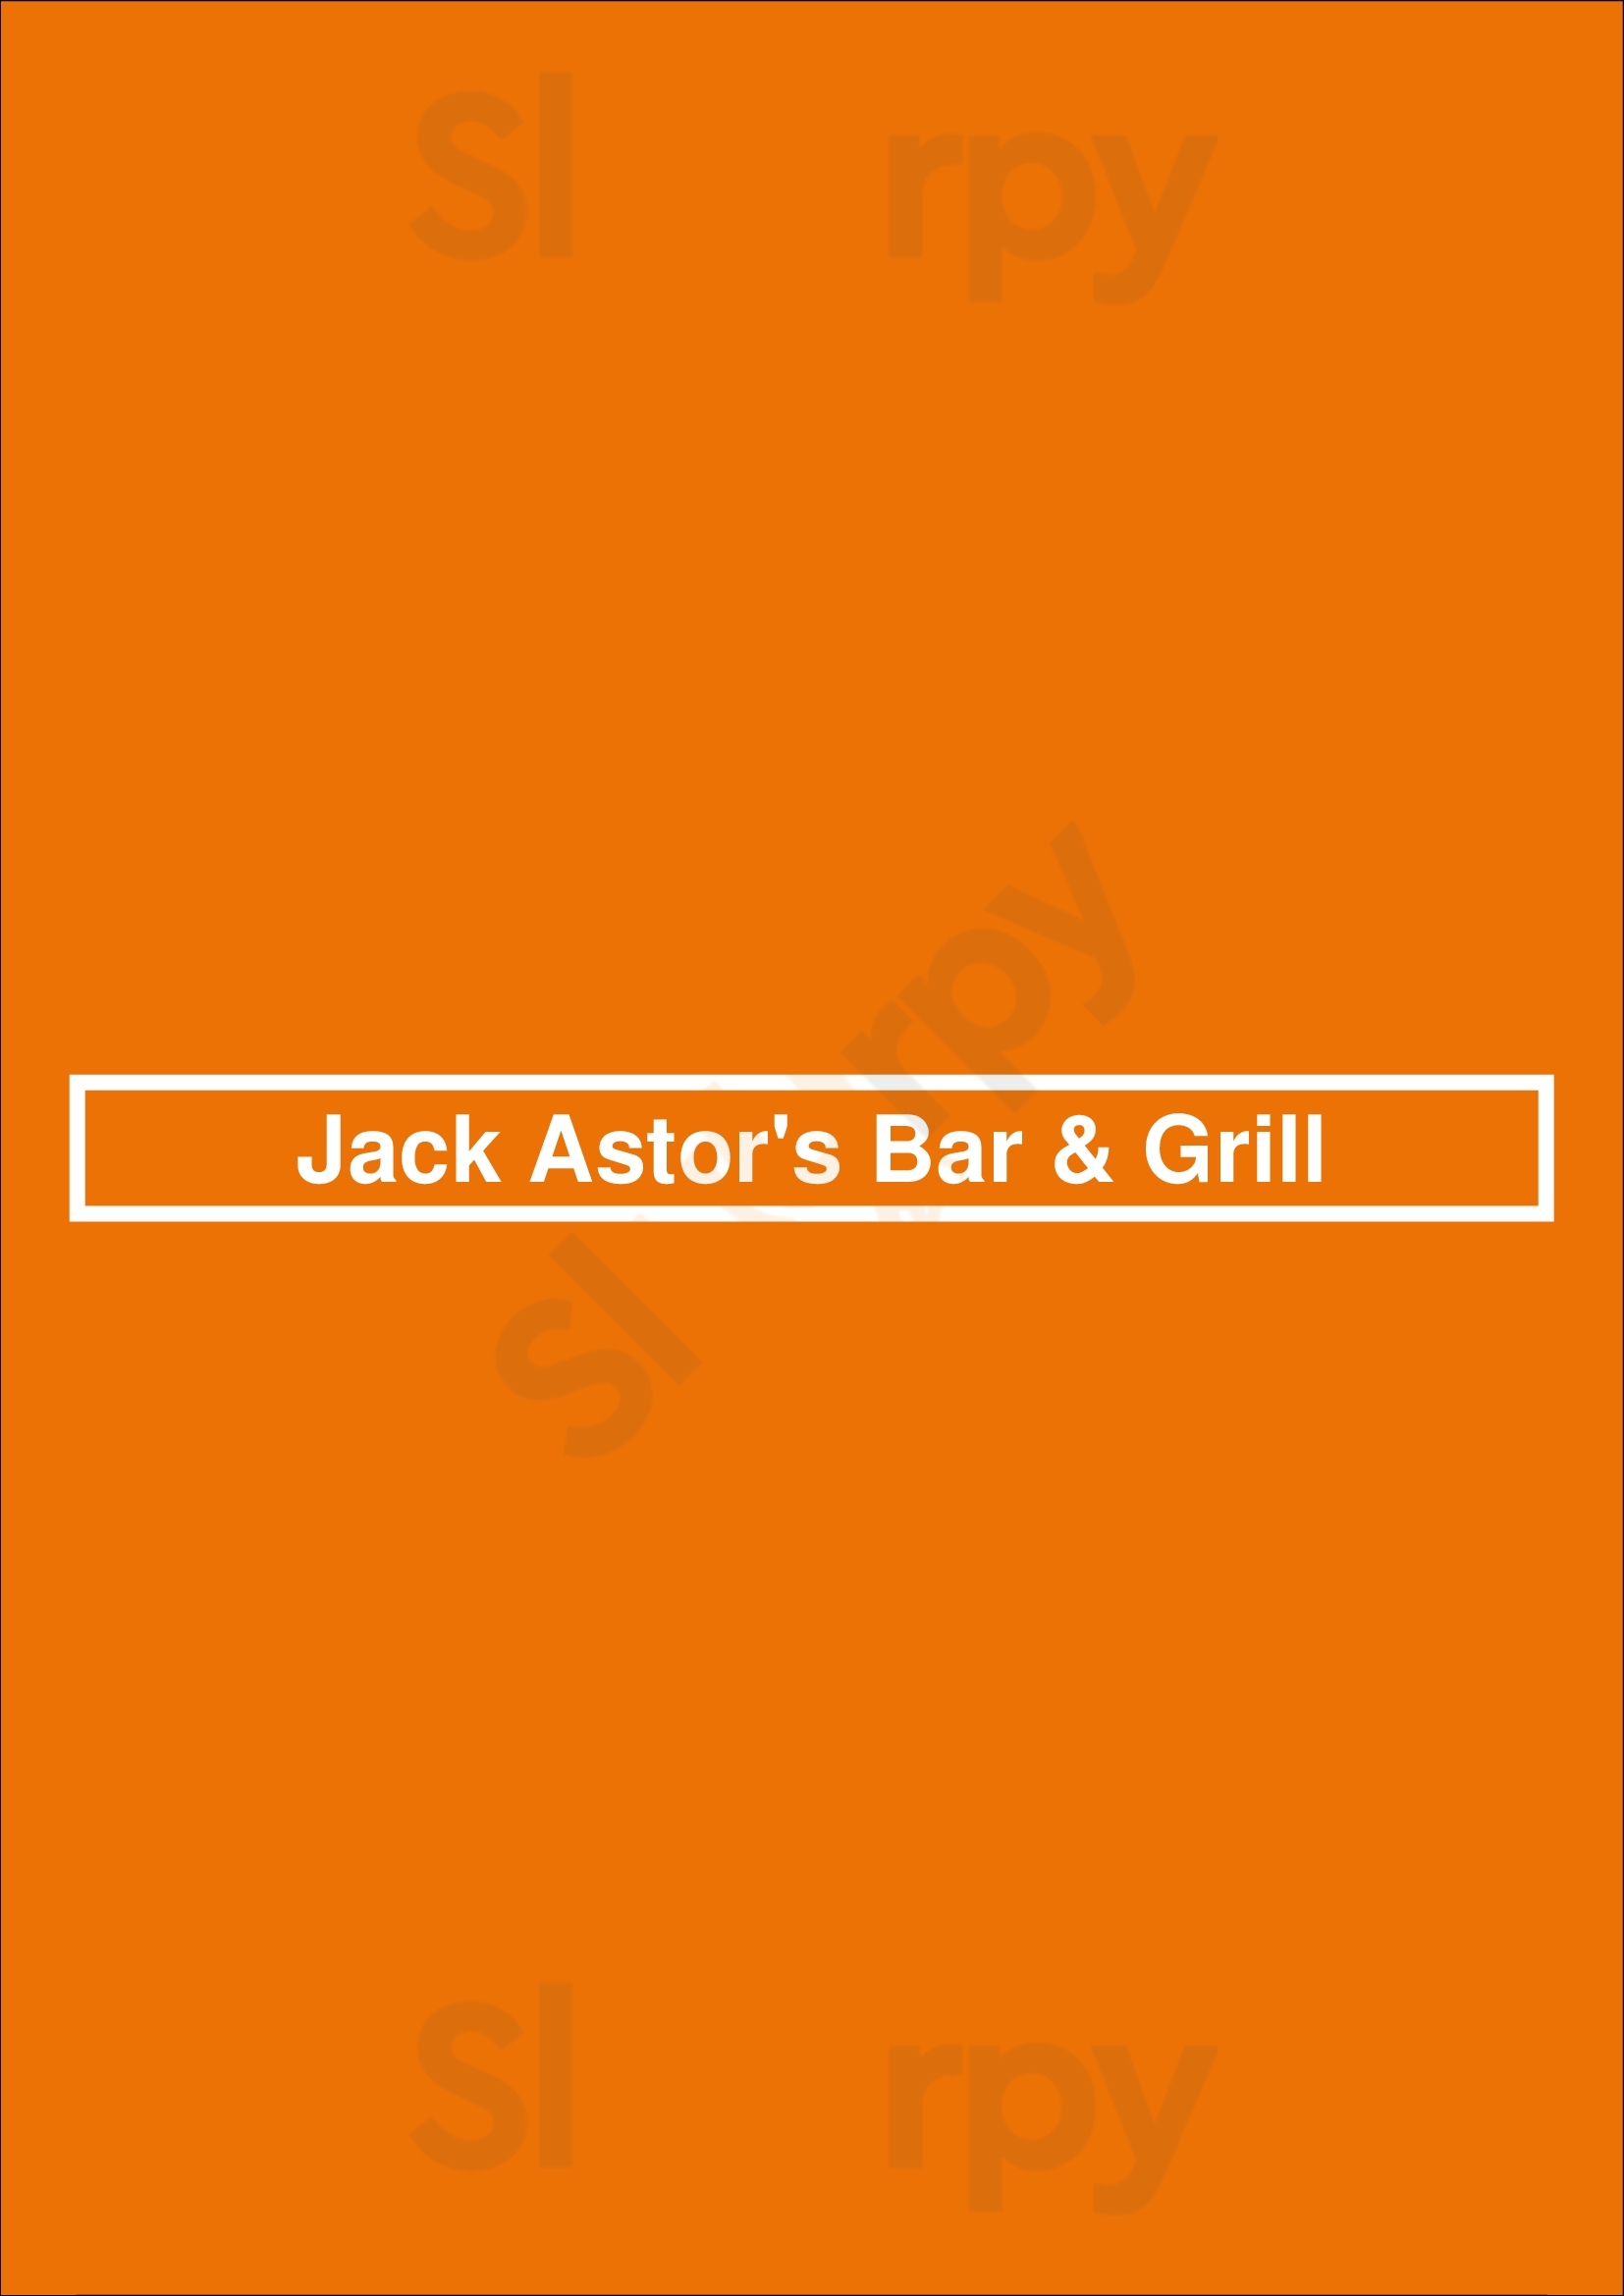 Jack Astor's Bar And Grill St. Catharines Menu - 1